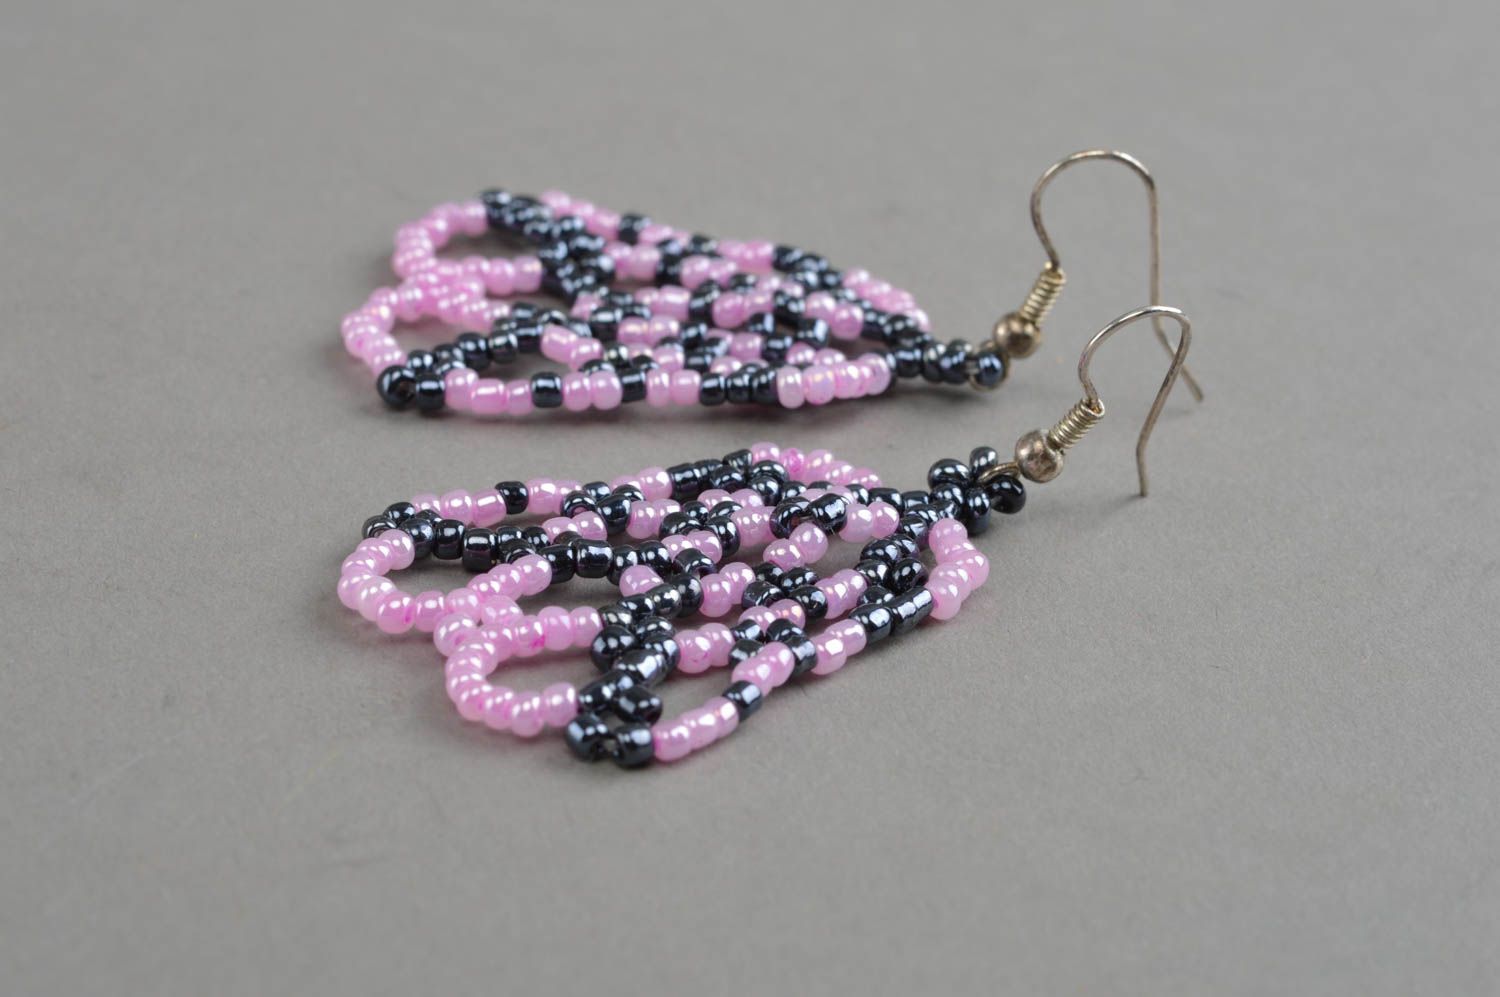 Large handmade beaded earrings designer jewelry fashion accessories gift ideas photo 3